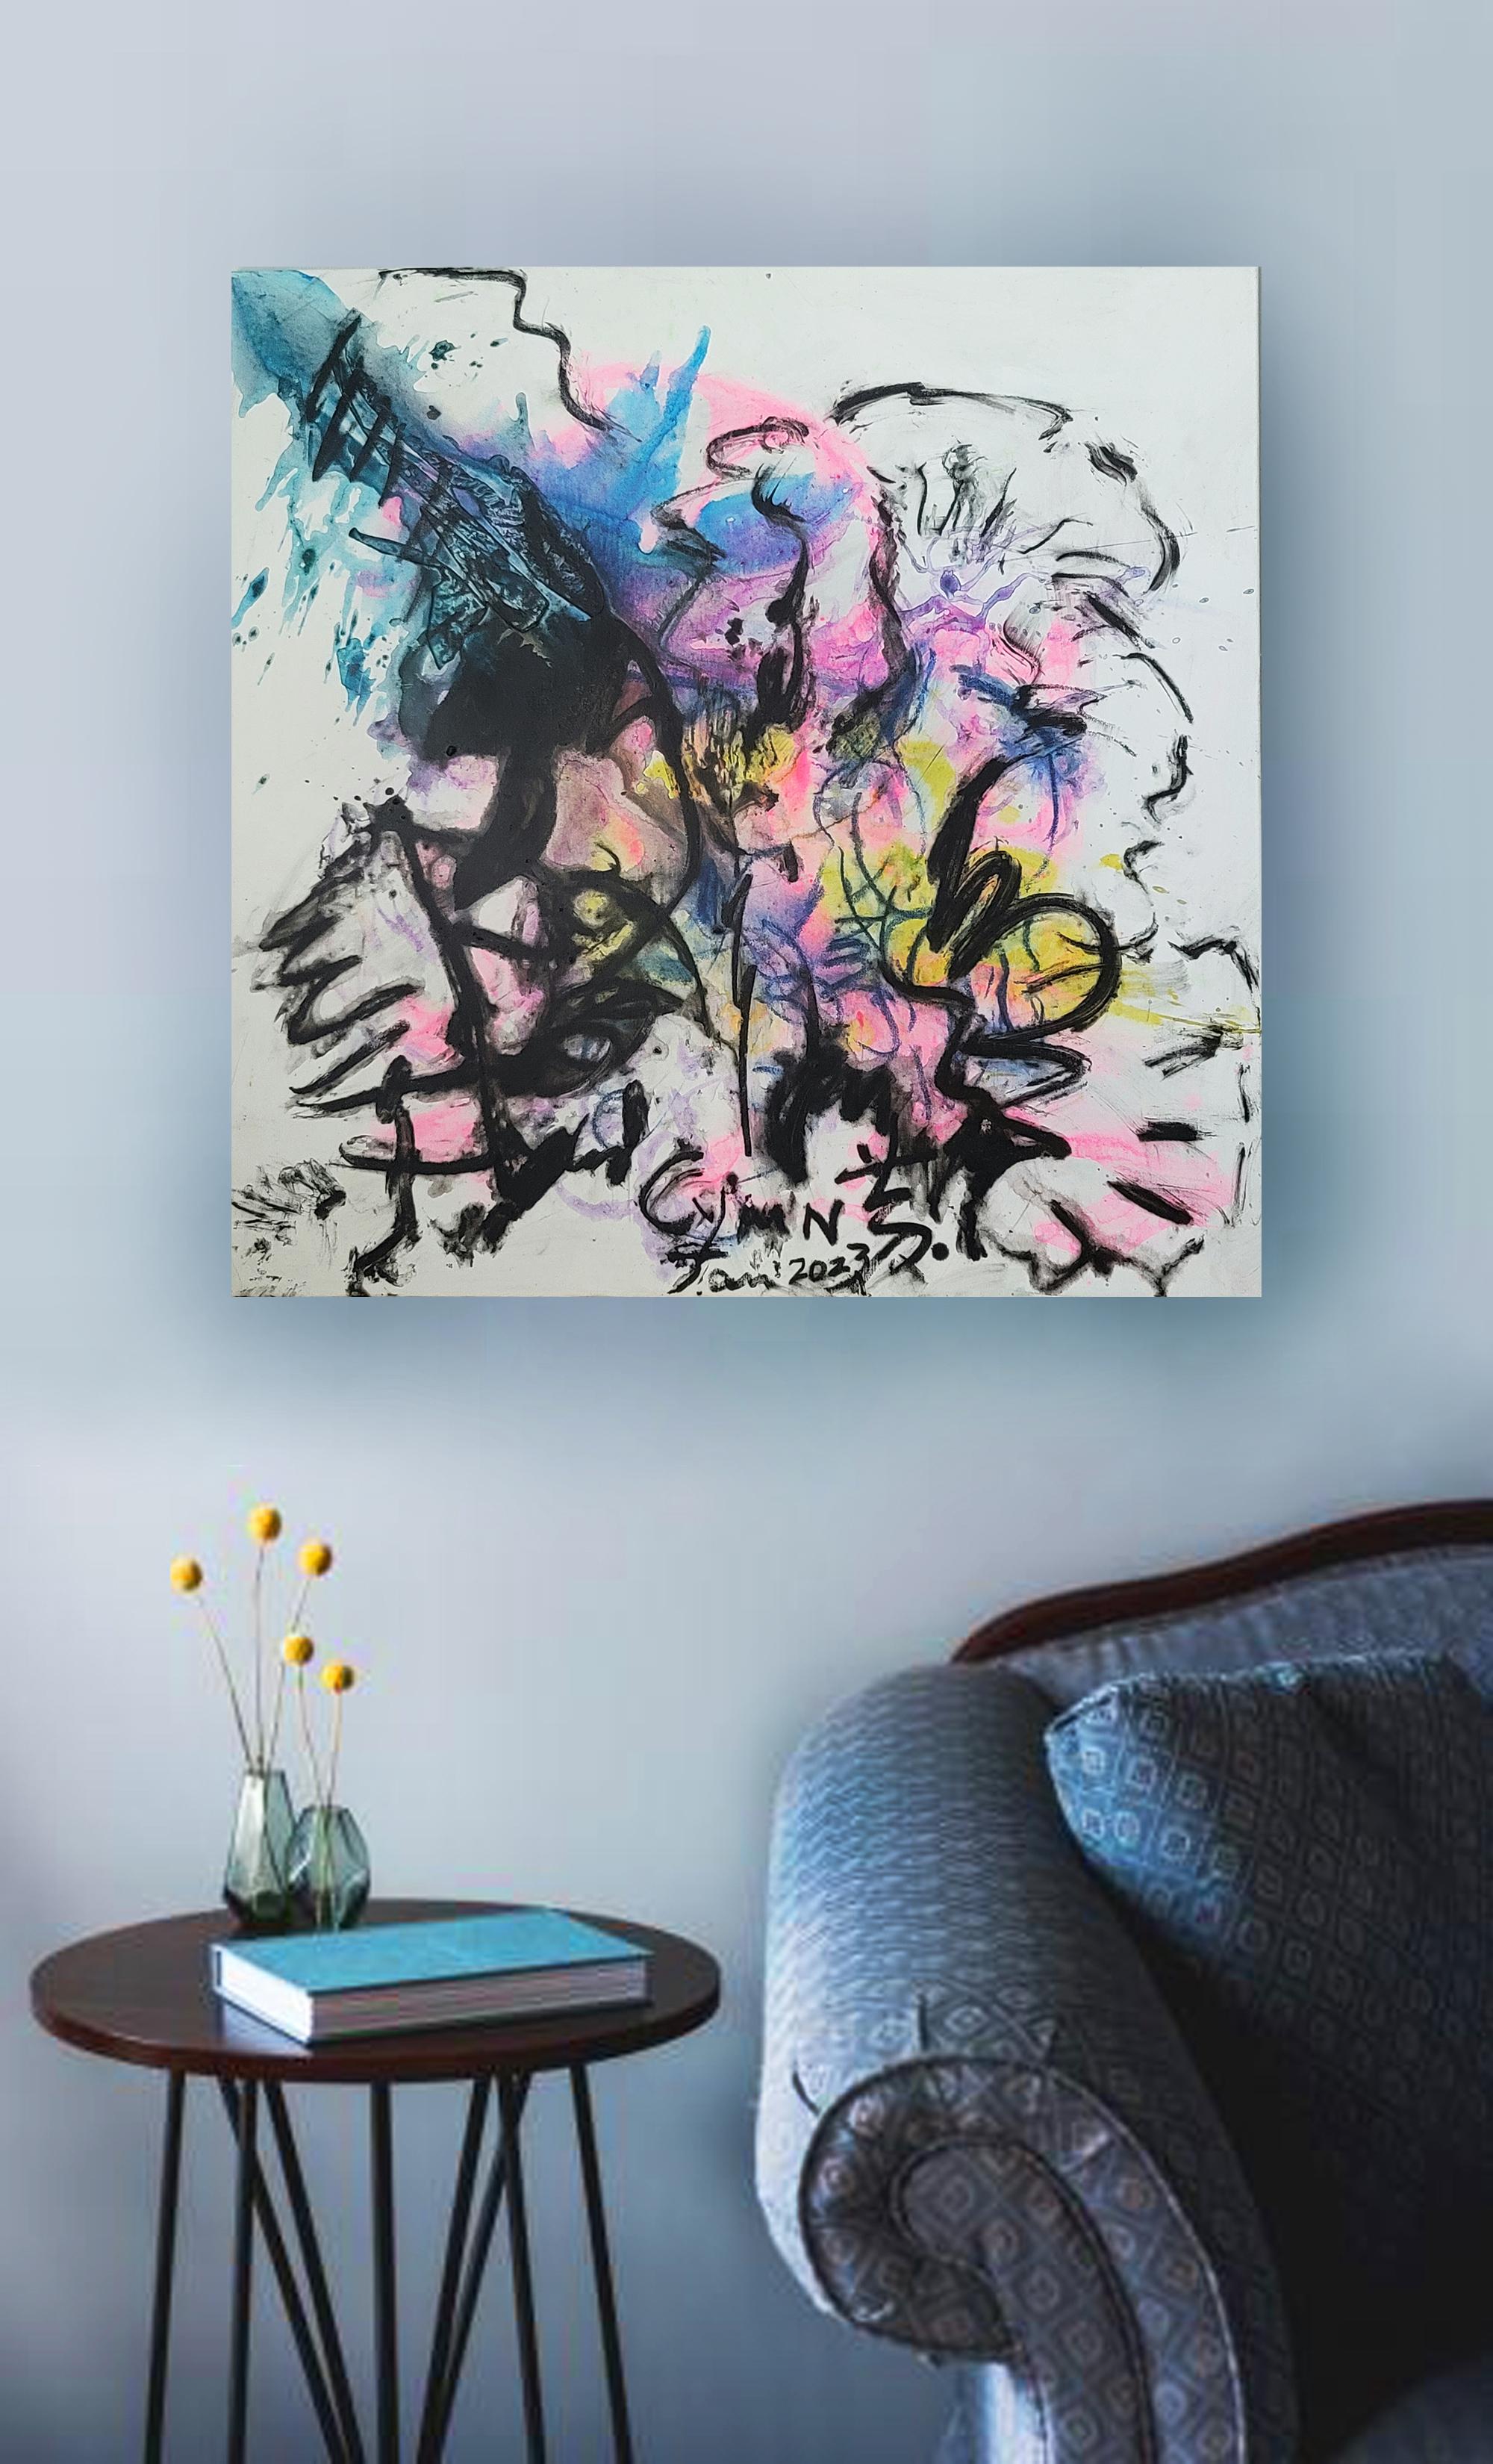 A Singular Transformation III - Energetic, Expressive Abstract, Zen Calligraphy - Abstract Expressionist Painting by Cymn Wong 